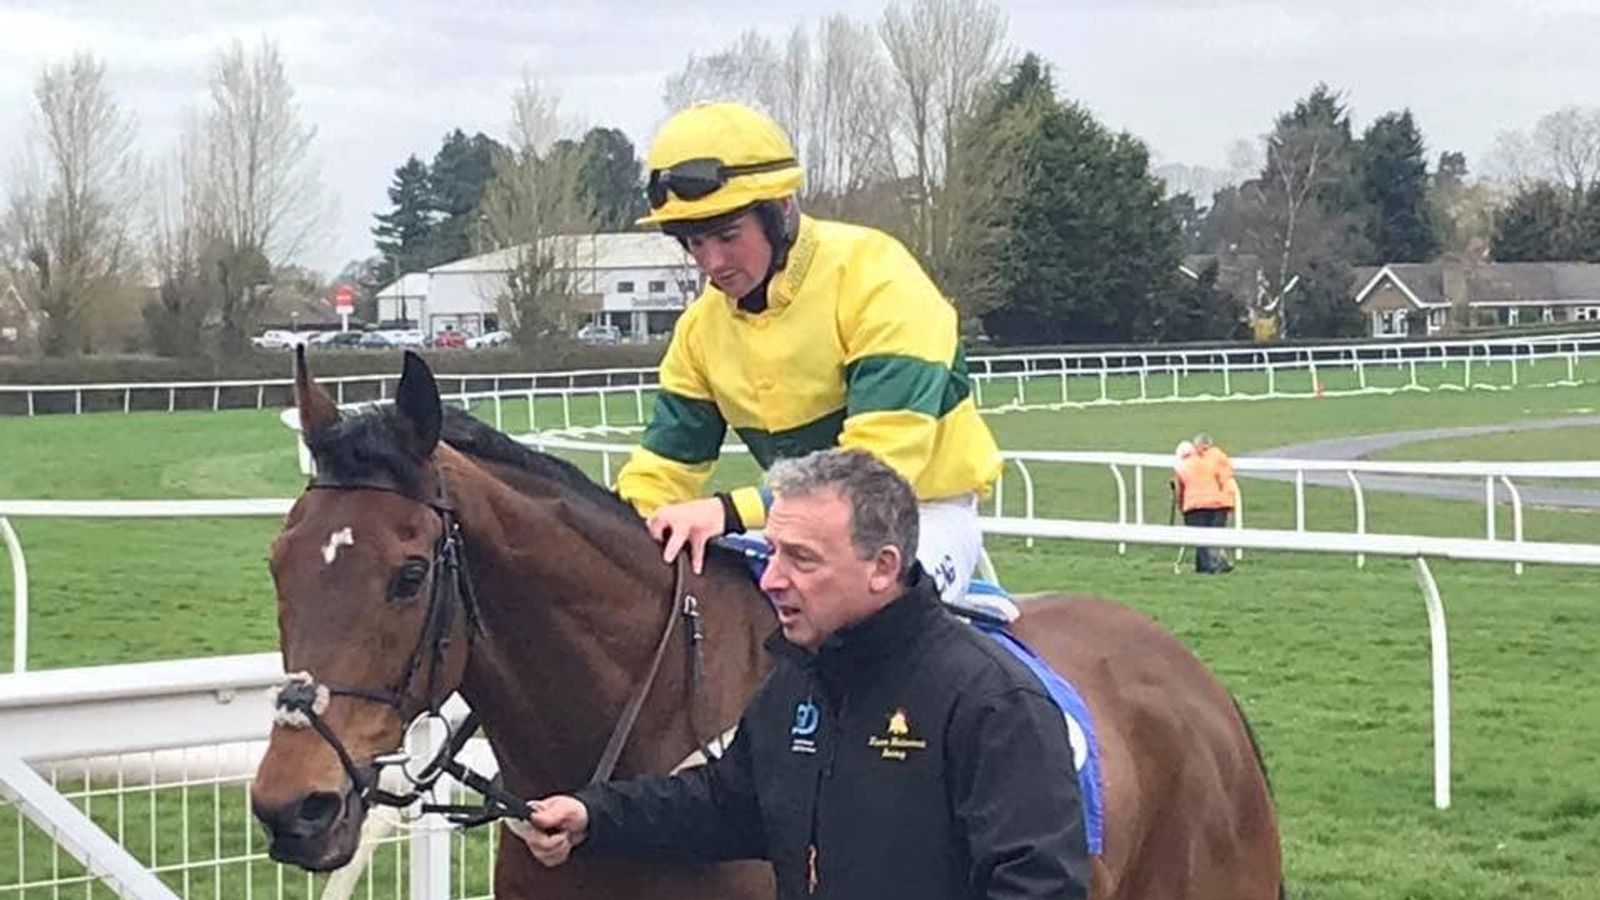 'He died in her arms' Trainer cradles dying race horse after headon